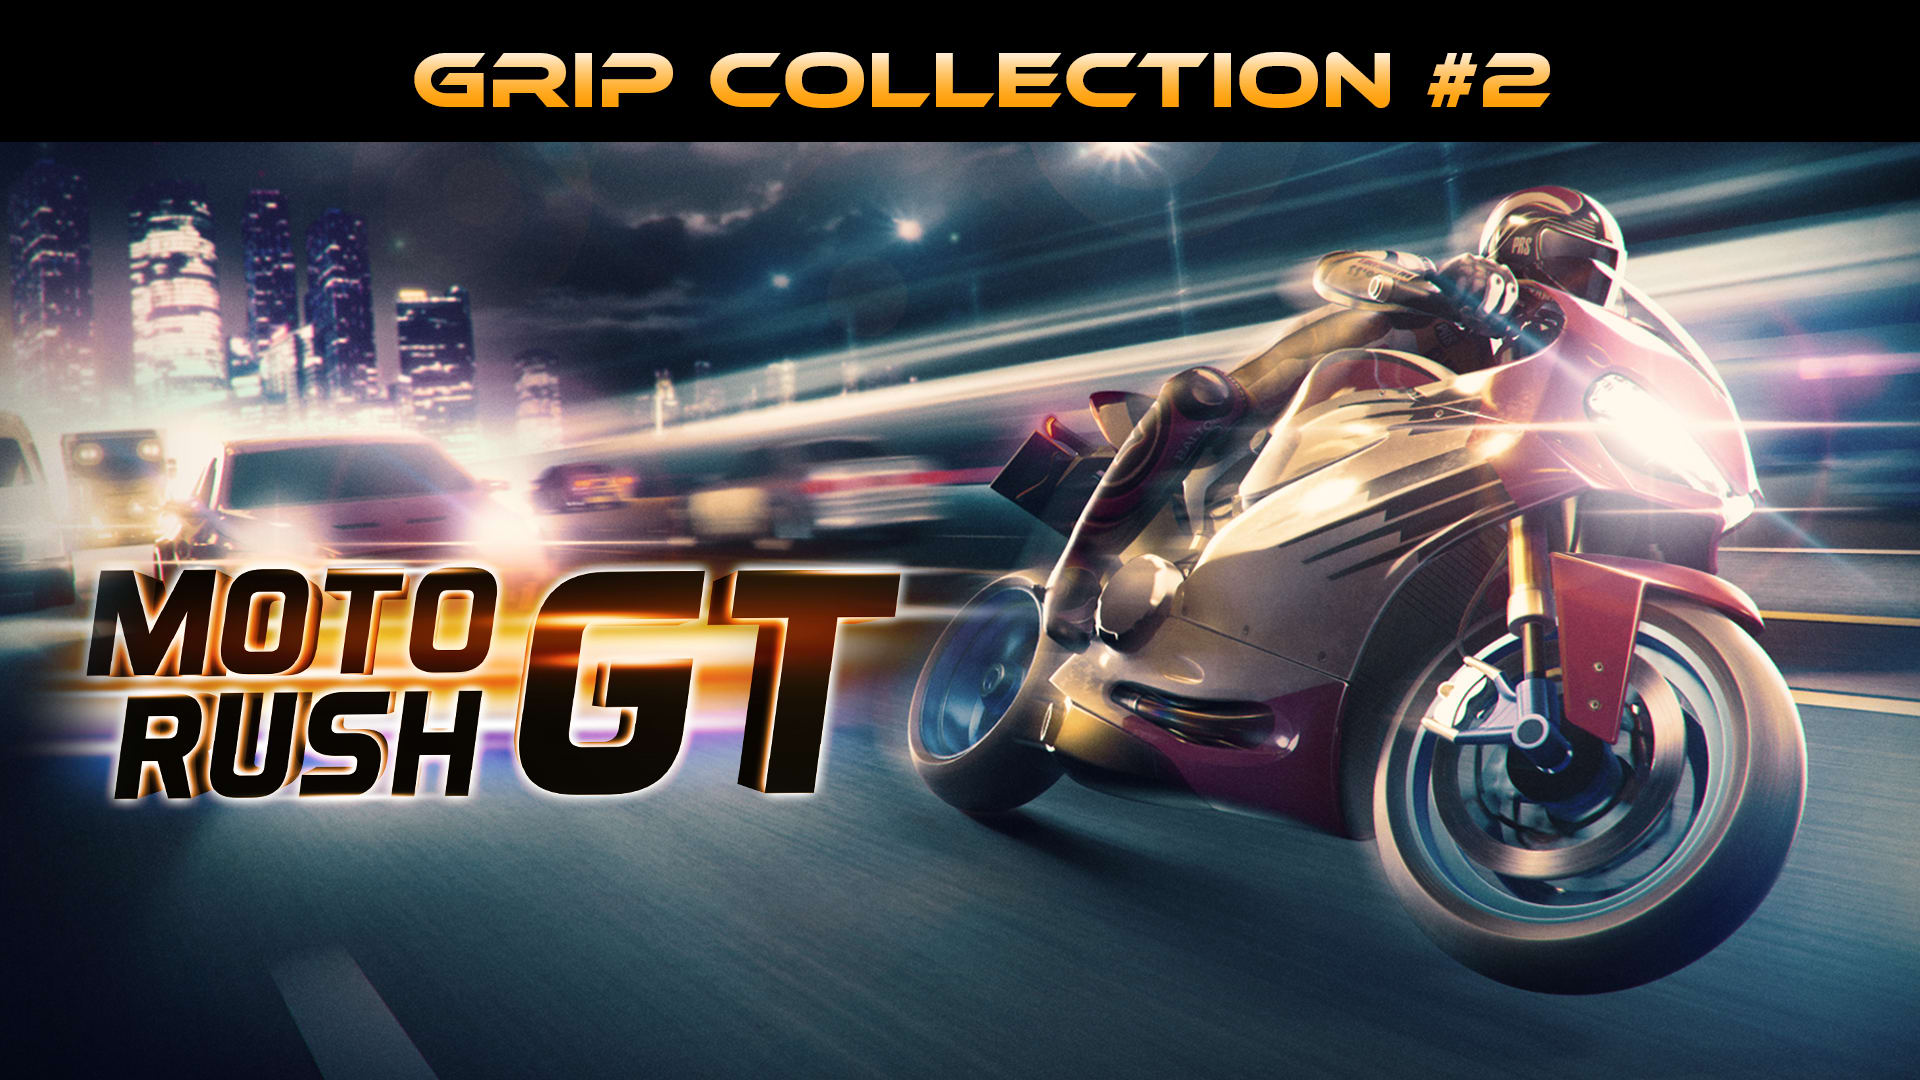 Moto Rush GT Grip Collection #2 1